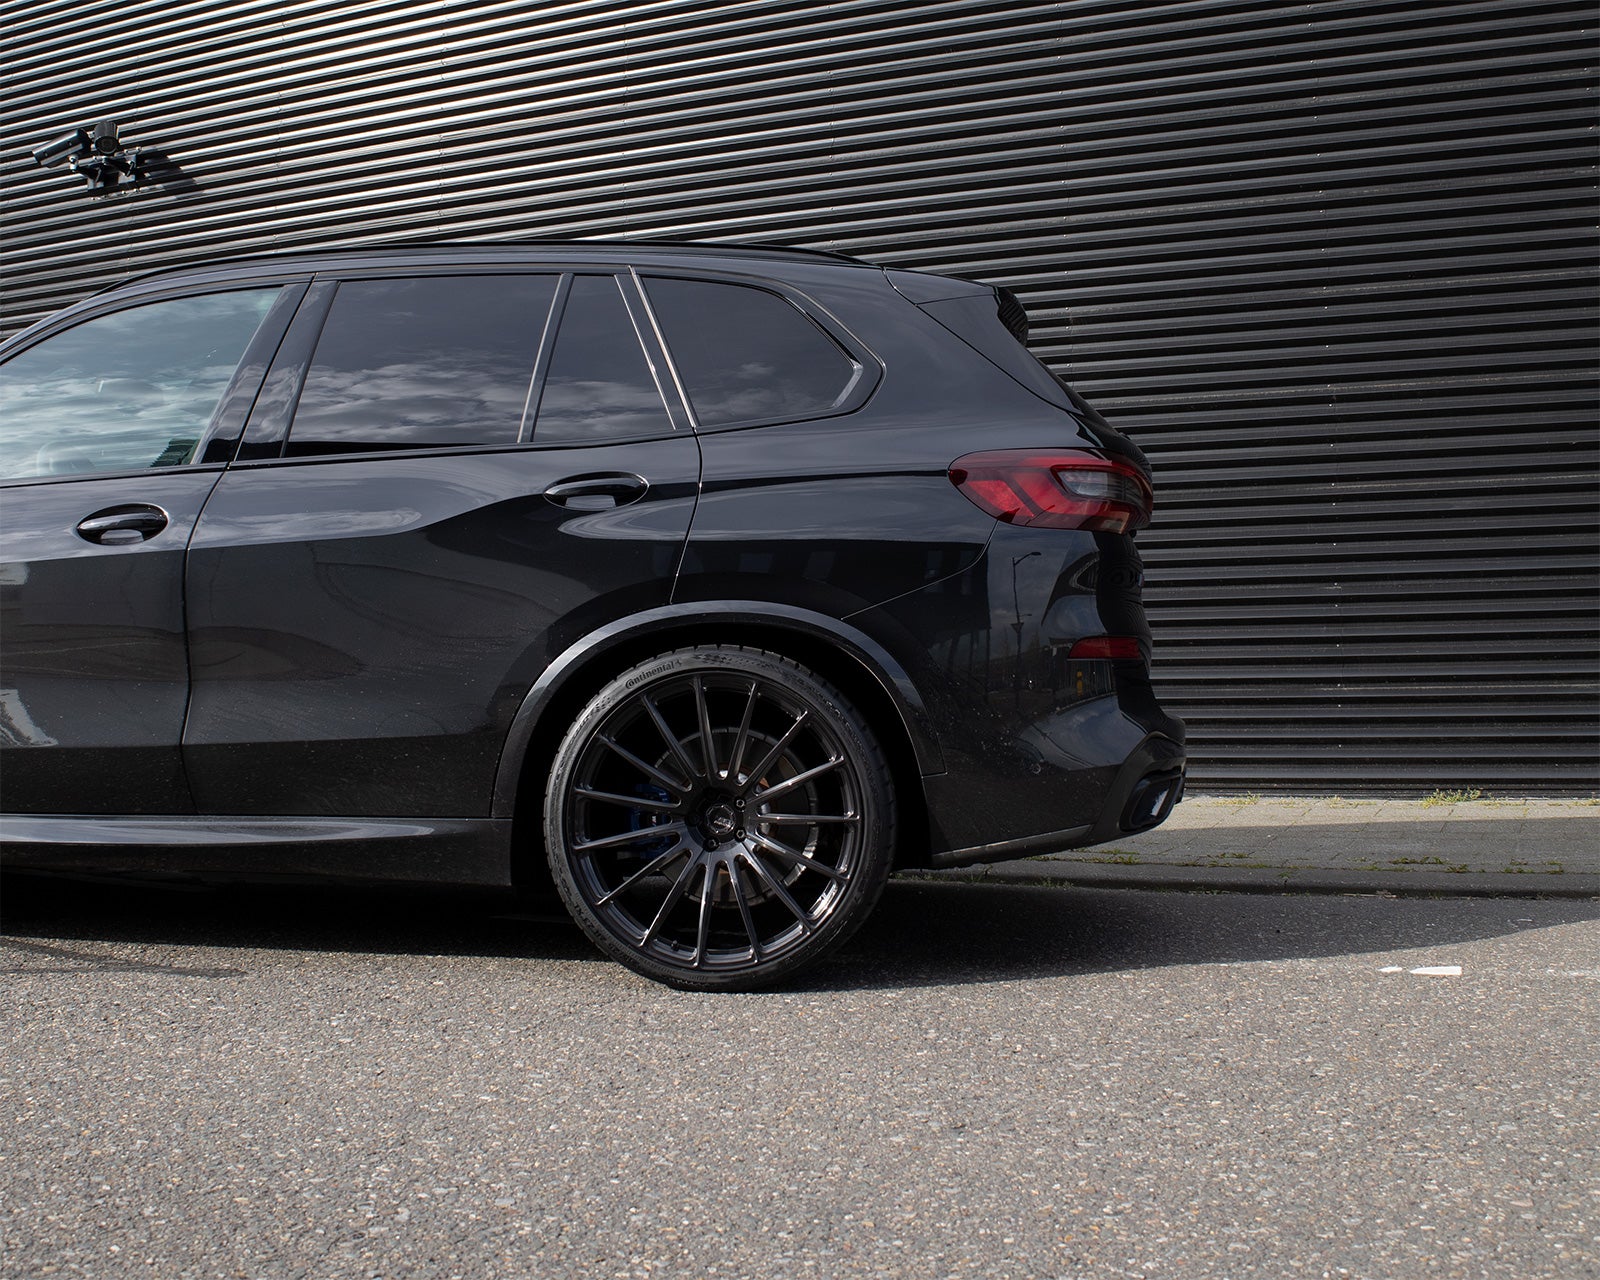 BMW G05 X5 with 23 inch BC Forged wheels